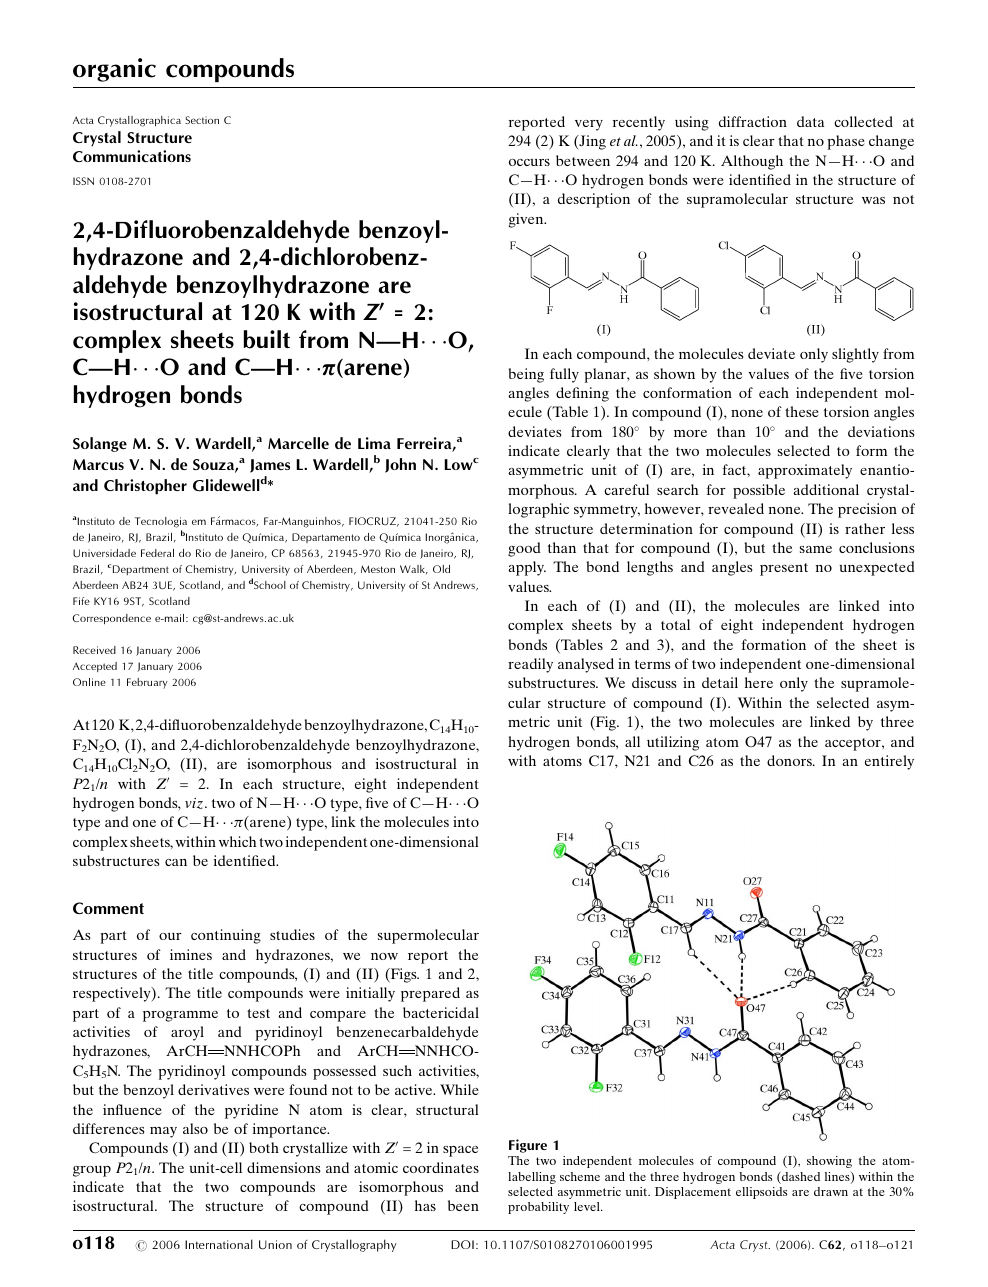 2 4 Difluorobenzaldehyde Benzoylhydrazone And 2 4 Dichlorobenzaldehyde Benzoylhydrazone Are Isostructural At 1 K With Z 2 Complex Sheets Built From N H O C H O And C H P Arene Hydrogen Bonds Topic Of Research Paper In Chemical